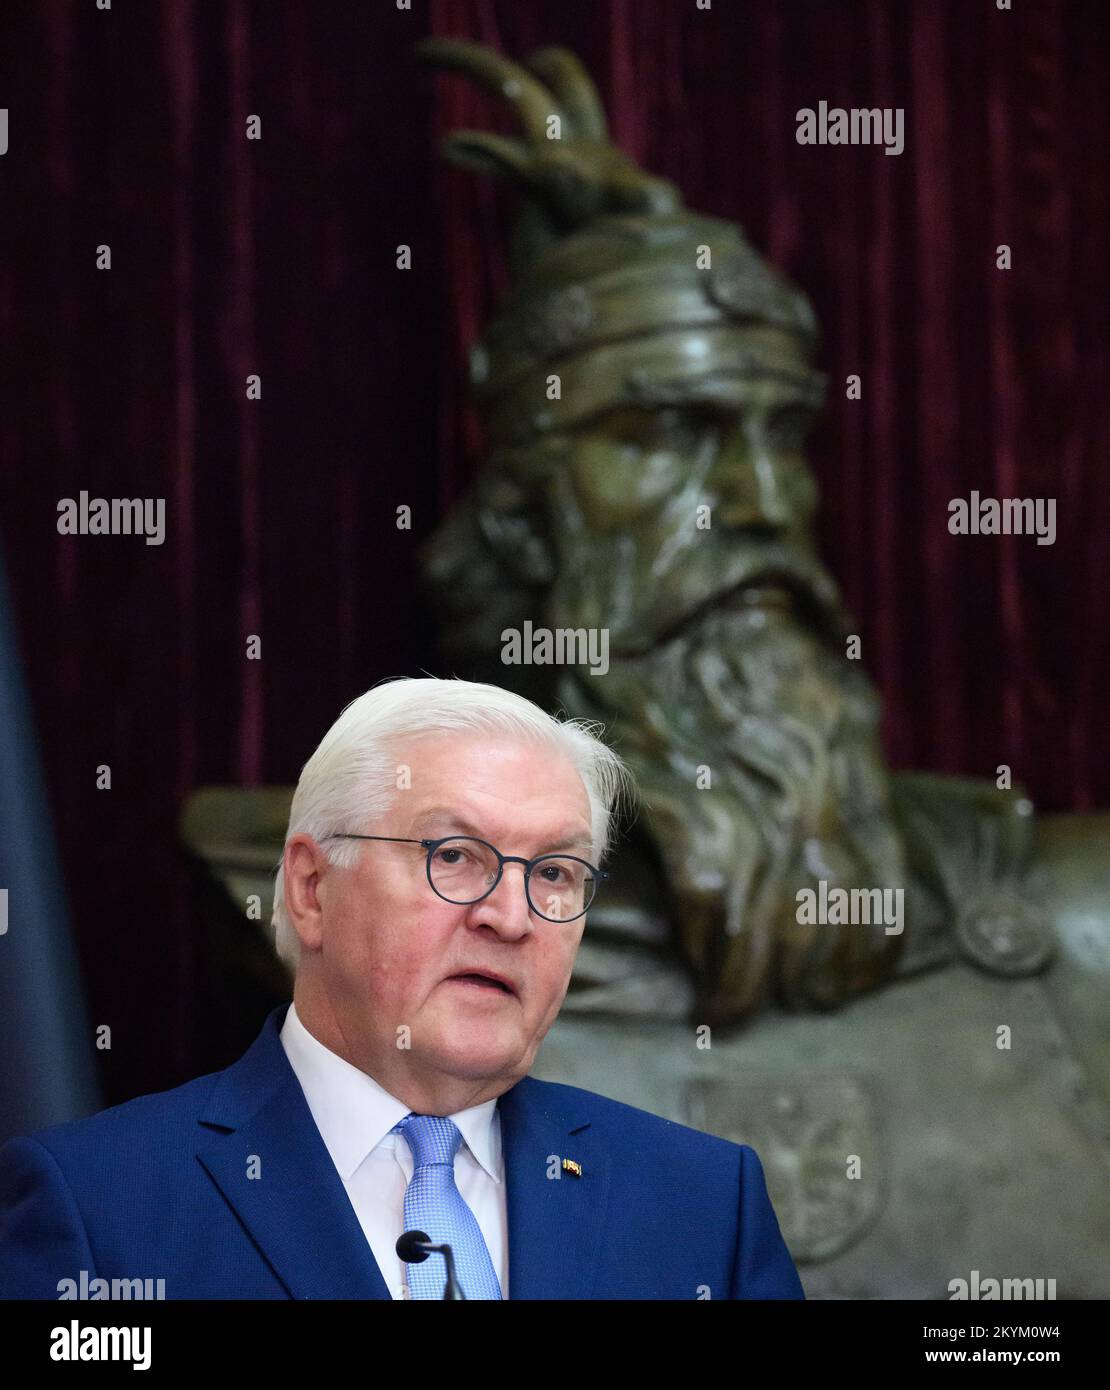 01 December 2022, Albania, Tirana: German President Frank-Walter Steinmeier speaks in front of a bust of Prince George Kastriota, known as Skanderbeg, at a press conference after his talks with the President of Albania, Begaj, at the President's official residence. President Steinmeier is visiting the countries of northern Macedonia and Albania during his four-day trip to the Balkans. In addition to the situation in the region and the effects of Russia's war of aggression in Ukraine, the trip will focus on Germany's support for the countries' prospects of joining the European Union. Photo: Ber Stock Photo